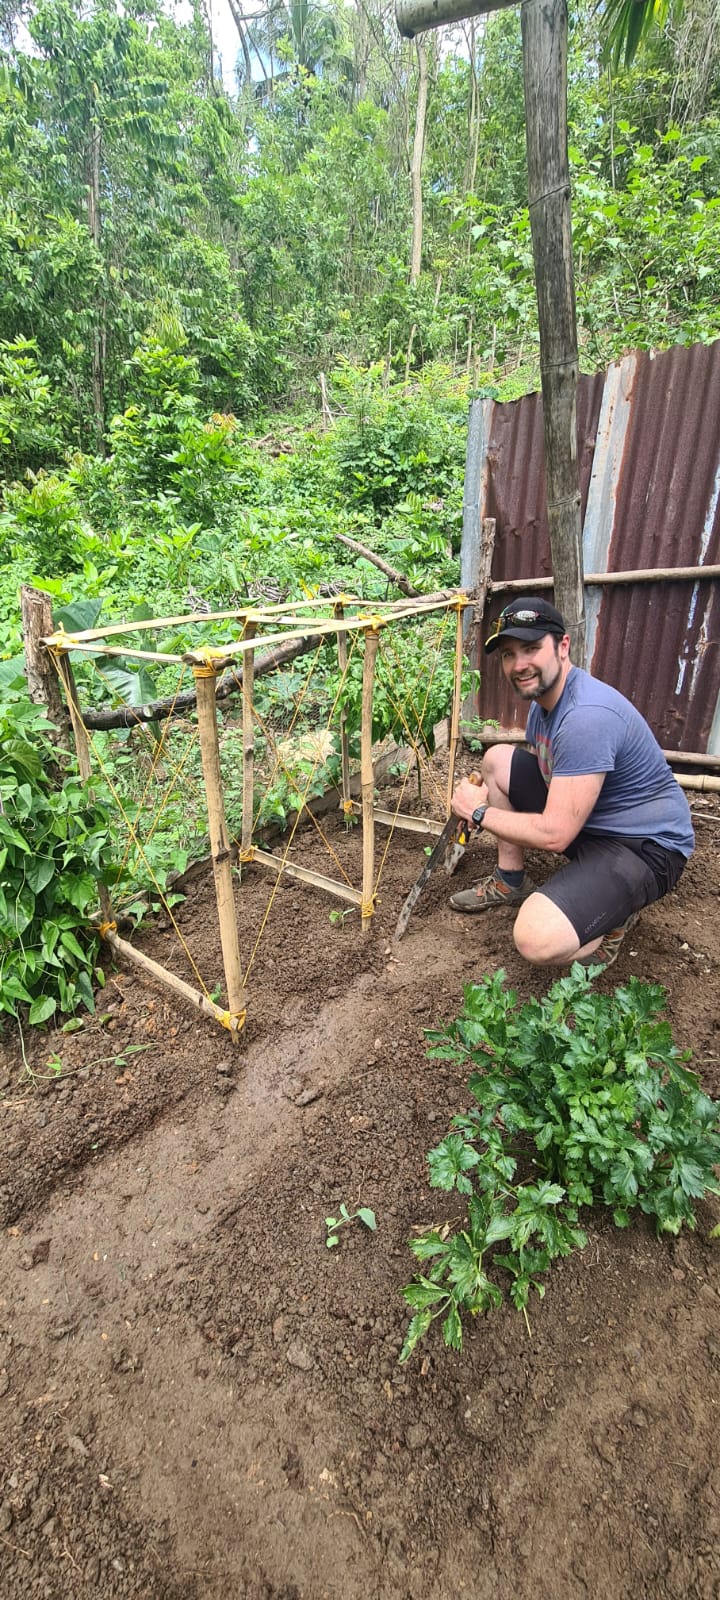 Making a trellis for the cucumber plants we planted!